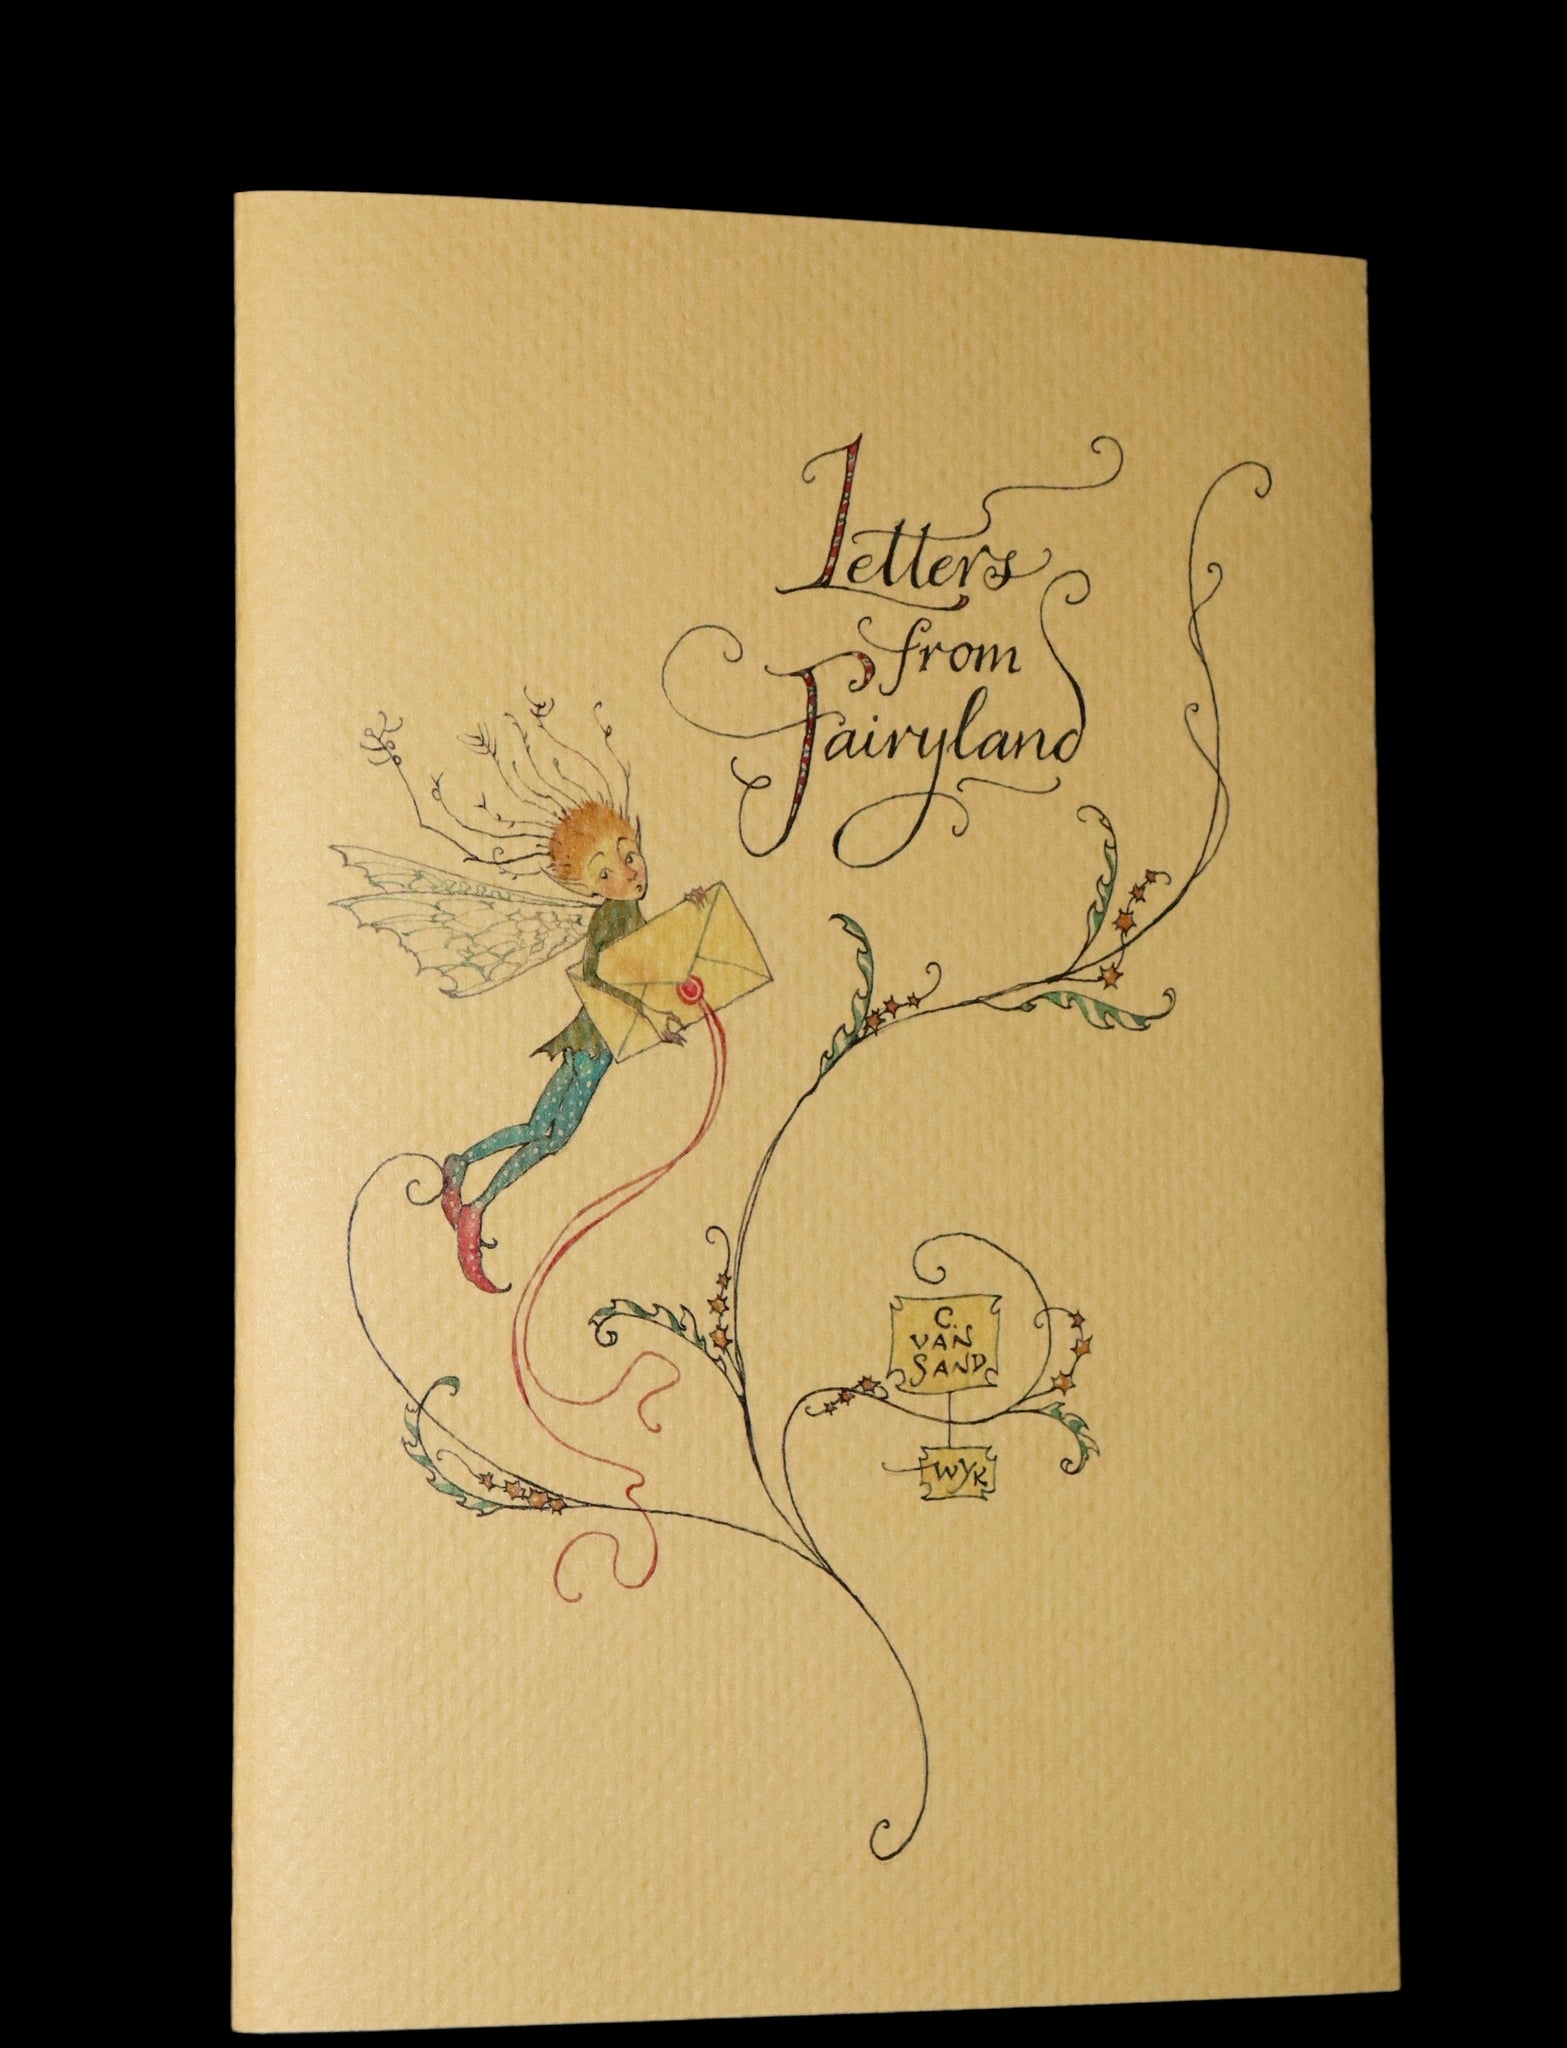 2016 Scarce First Edition - Letters From Fairyland by Charles van Sandwyk.